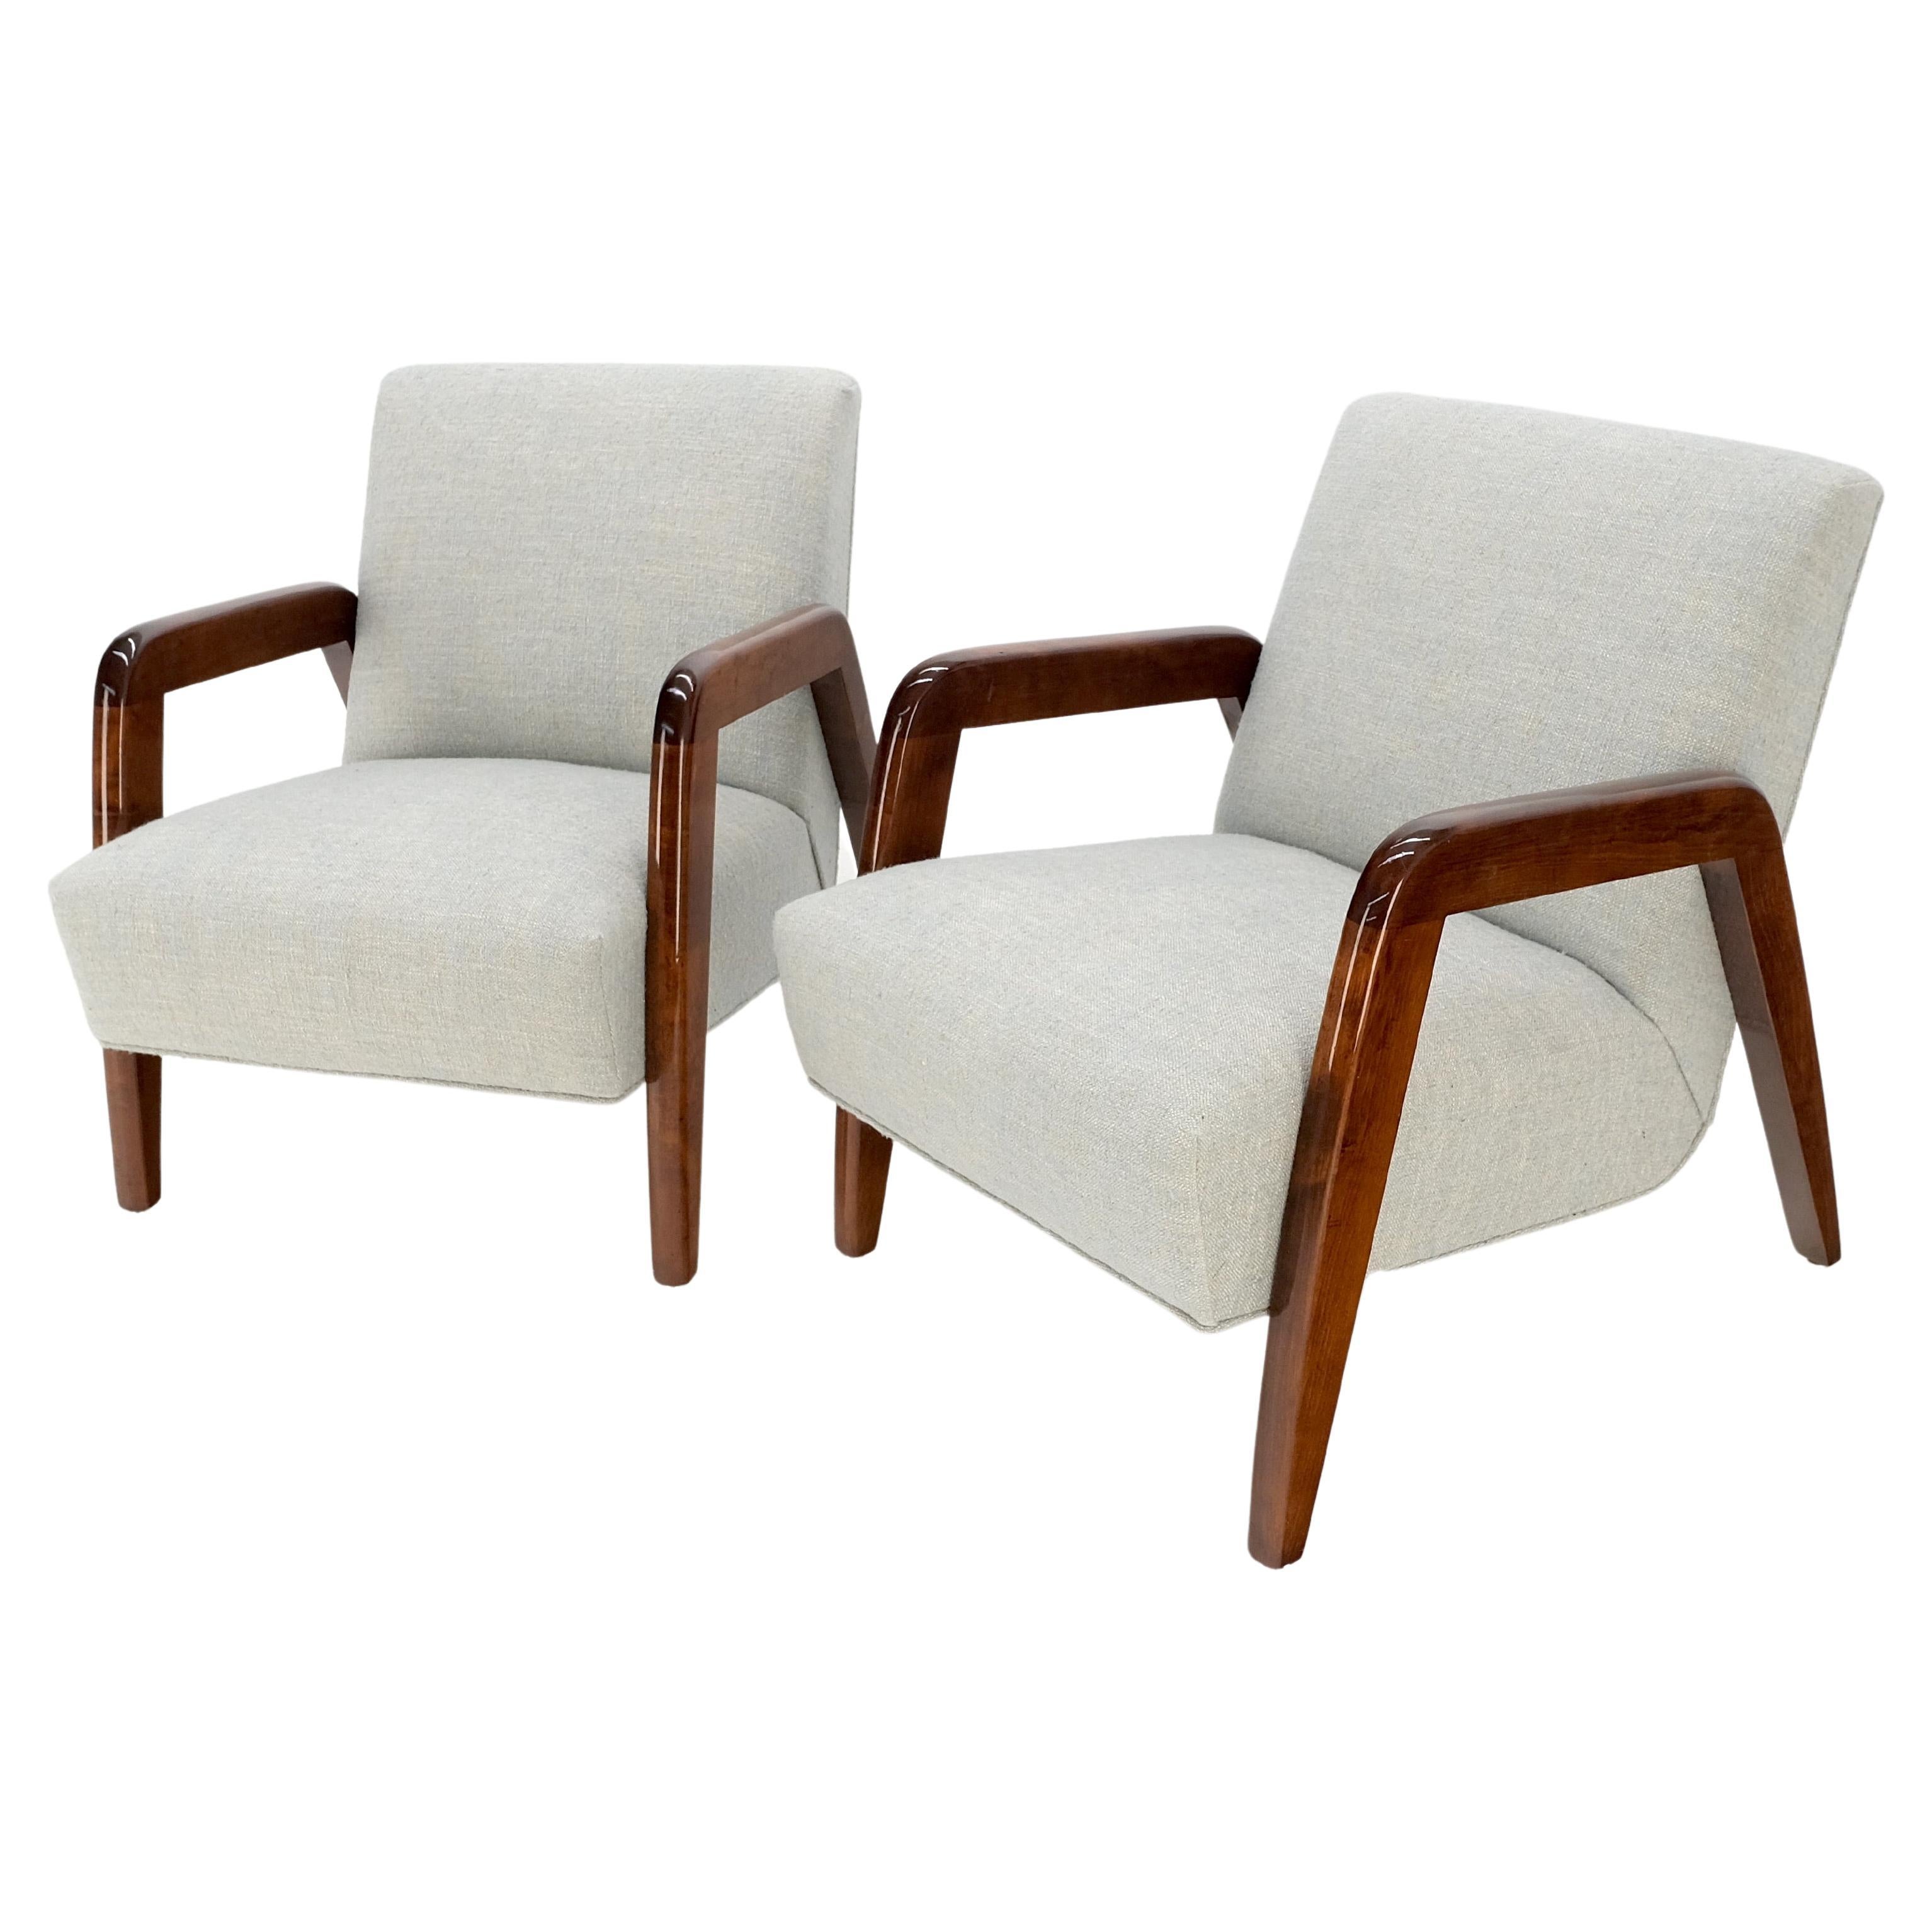 Pair New Leinen Polsterung Heavy Solid Maple Frames American  Lounge Chairs MINT!